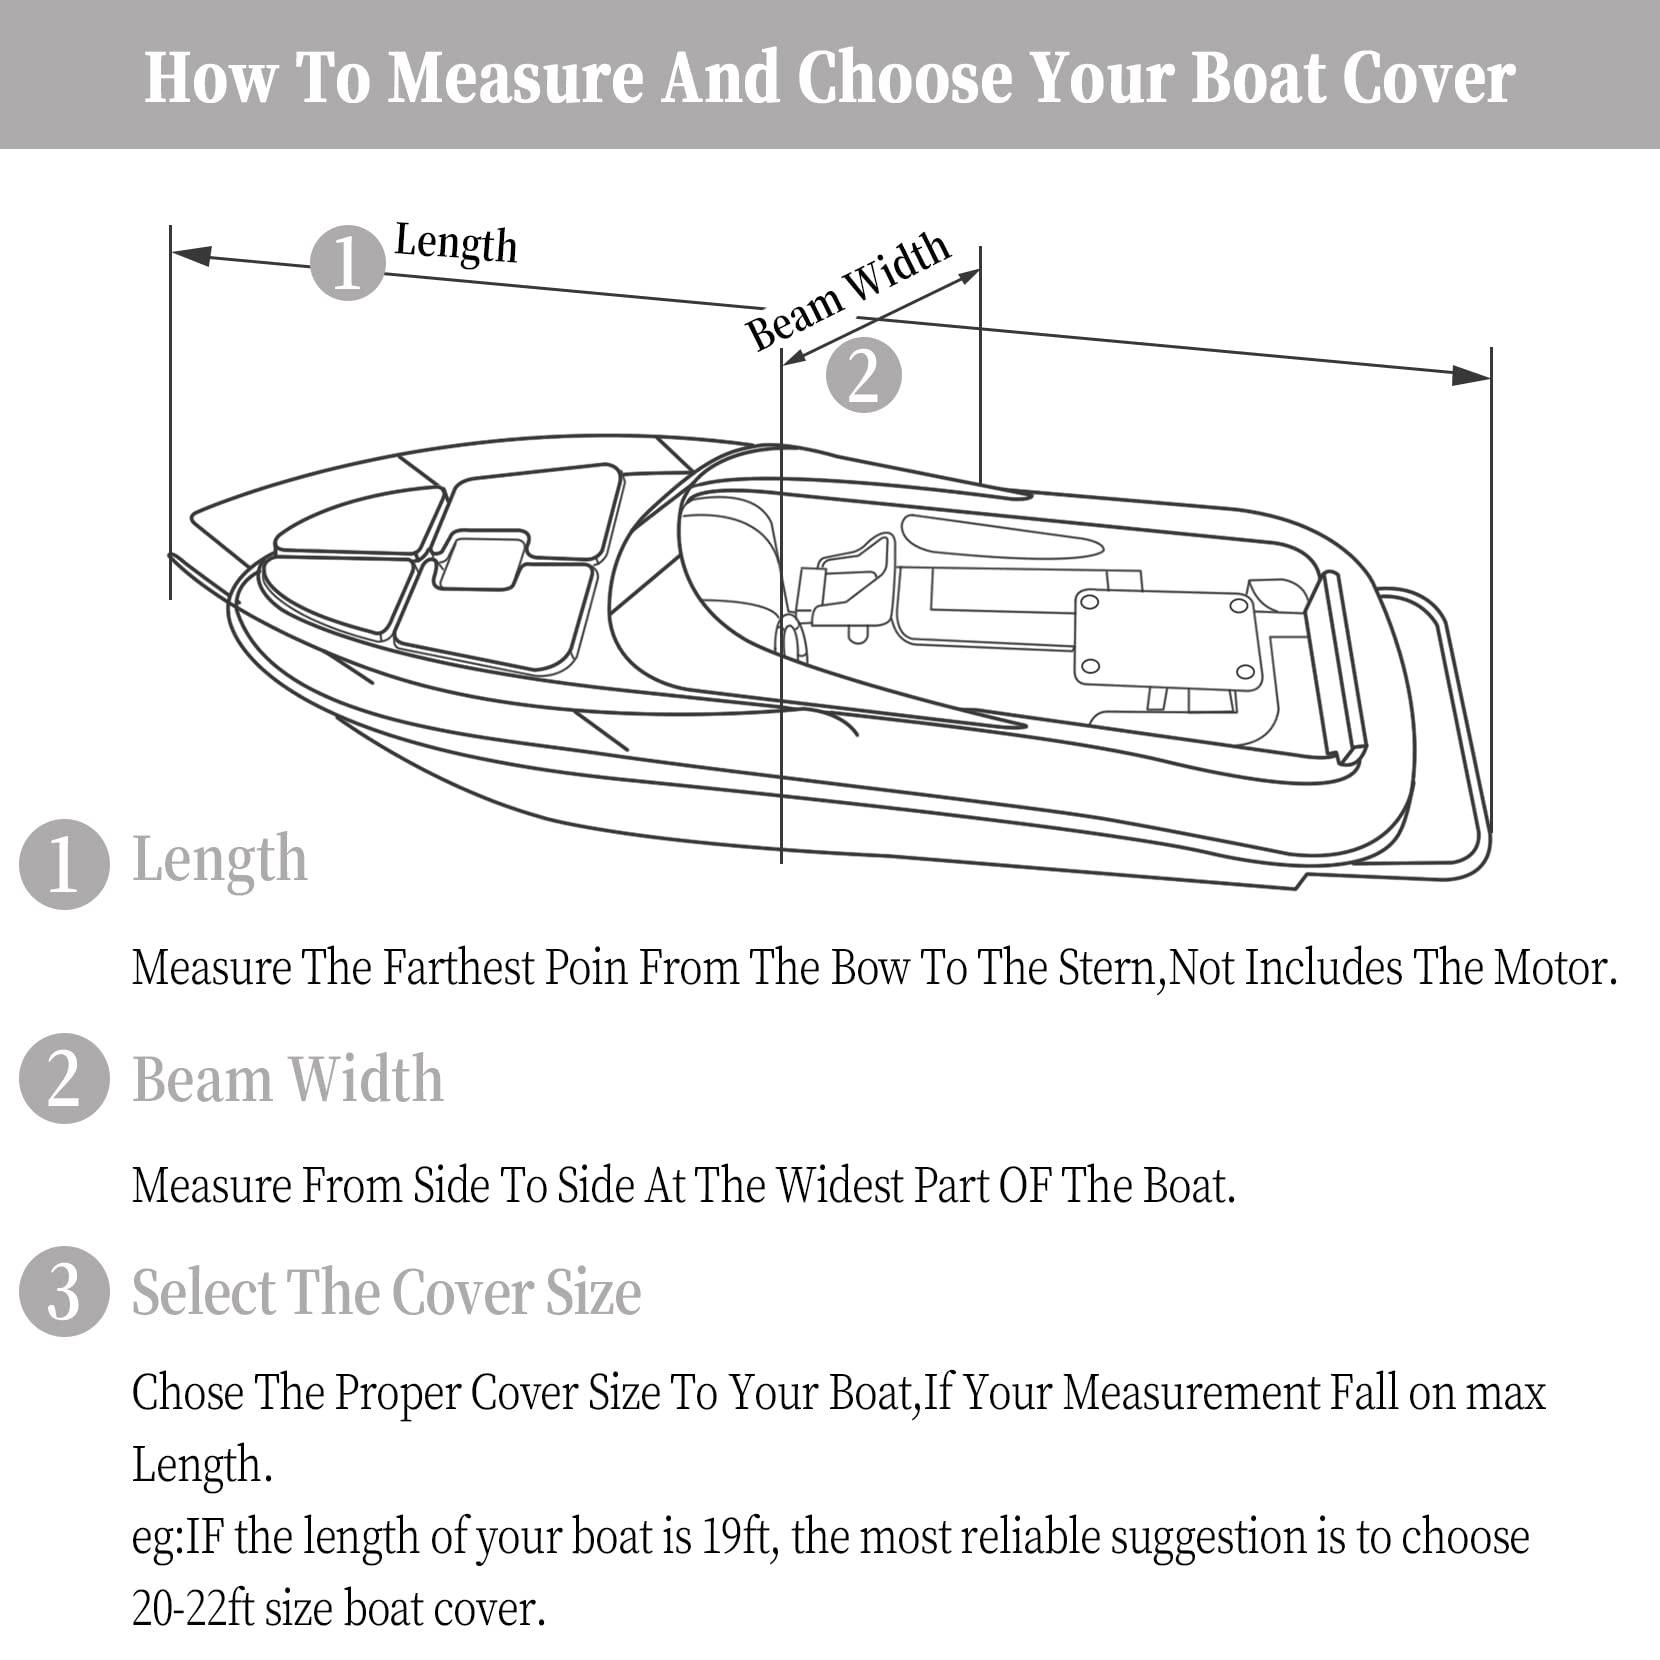 Boat Cover, MAROUTE 600D Waterproof Trailerable Marine Grade Polyster Canvas Fits V-Hull, Tri-Hull Fishing Boat, Runabout, SKi Boat, Bass Boat, up to (Length 17ft-19ft Beam Width Up to 96